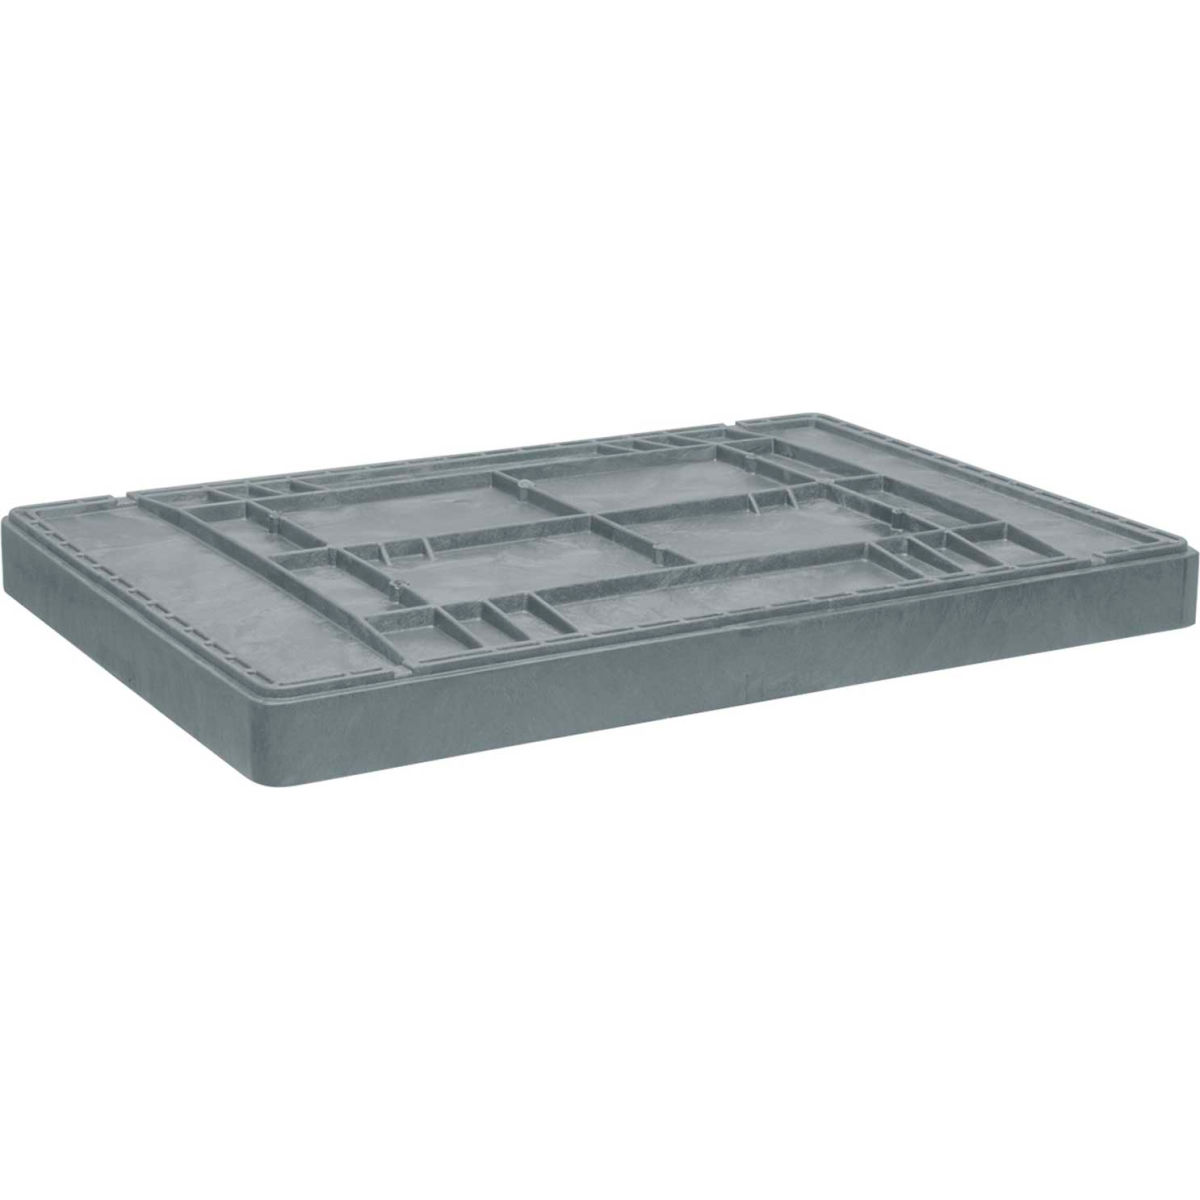 Picture of Akro-Mils 4734900 Buckhorn TL42290400SG000 Agricultural Bulk Box Lid - Light Gray - 42 x 29 in.